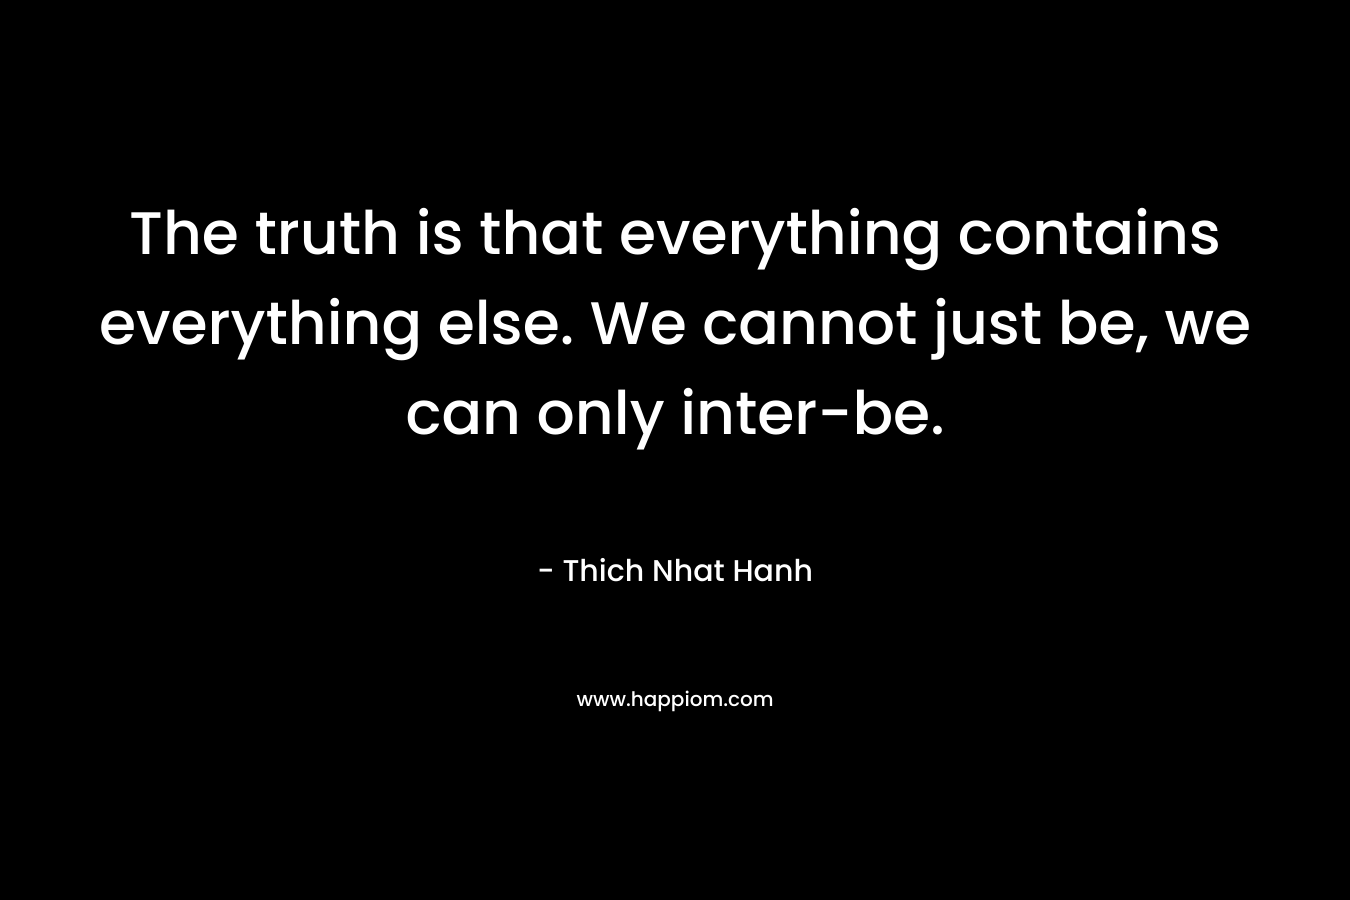 The truth is that everything contains everything else. We cannot just be, we can only inter-be.